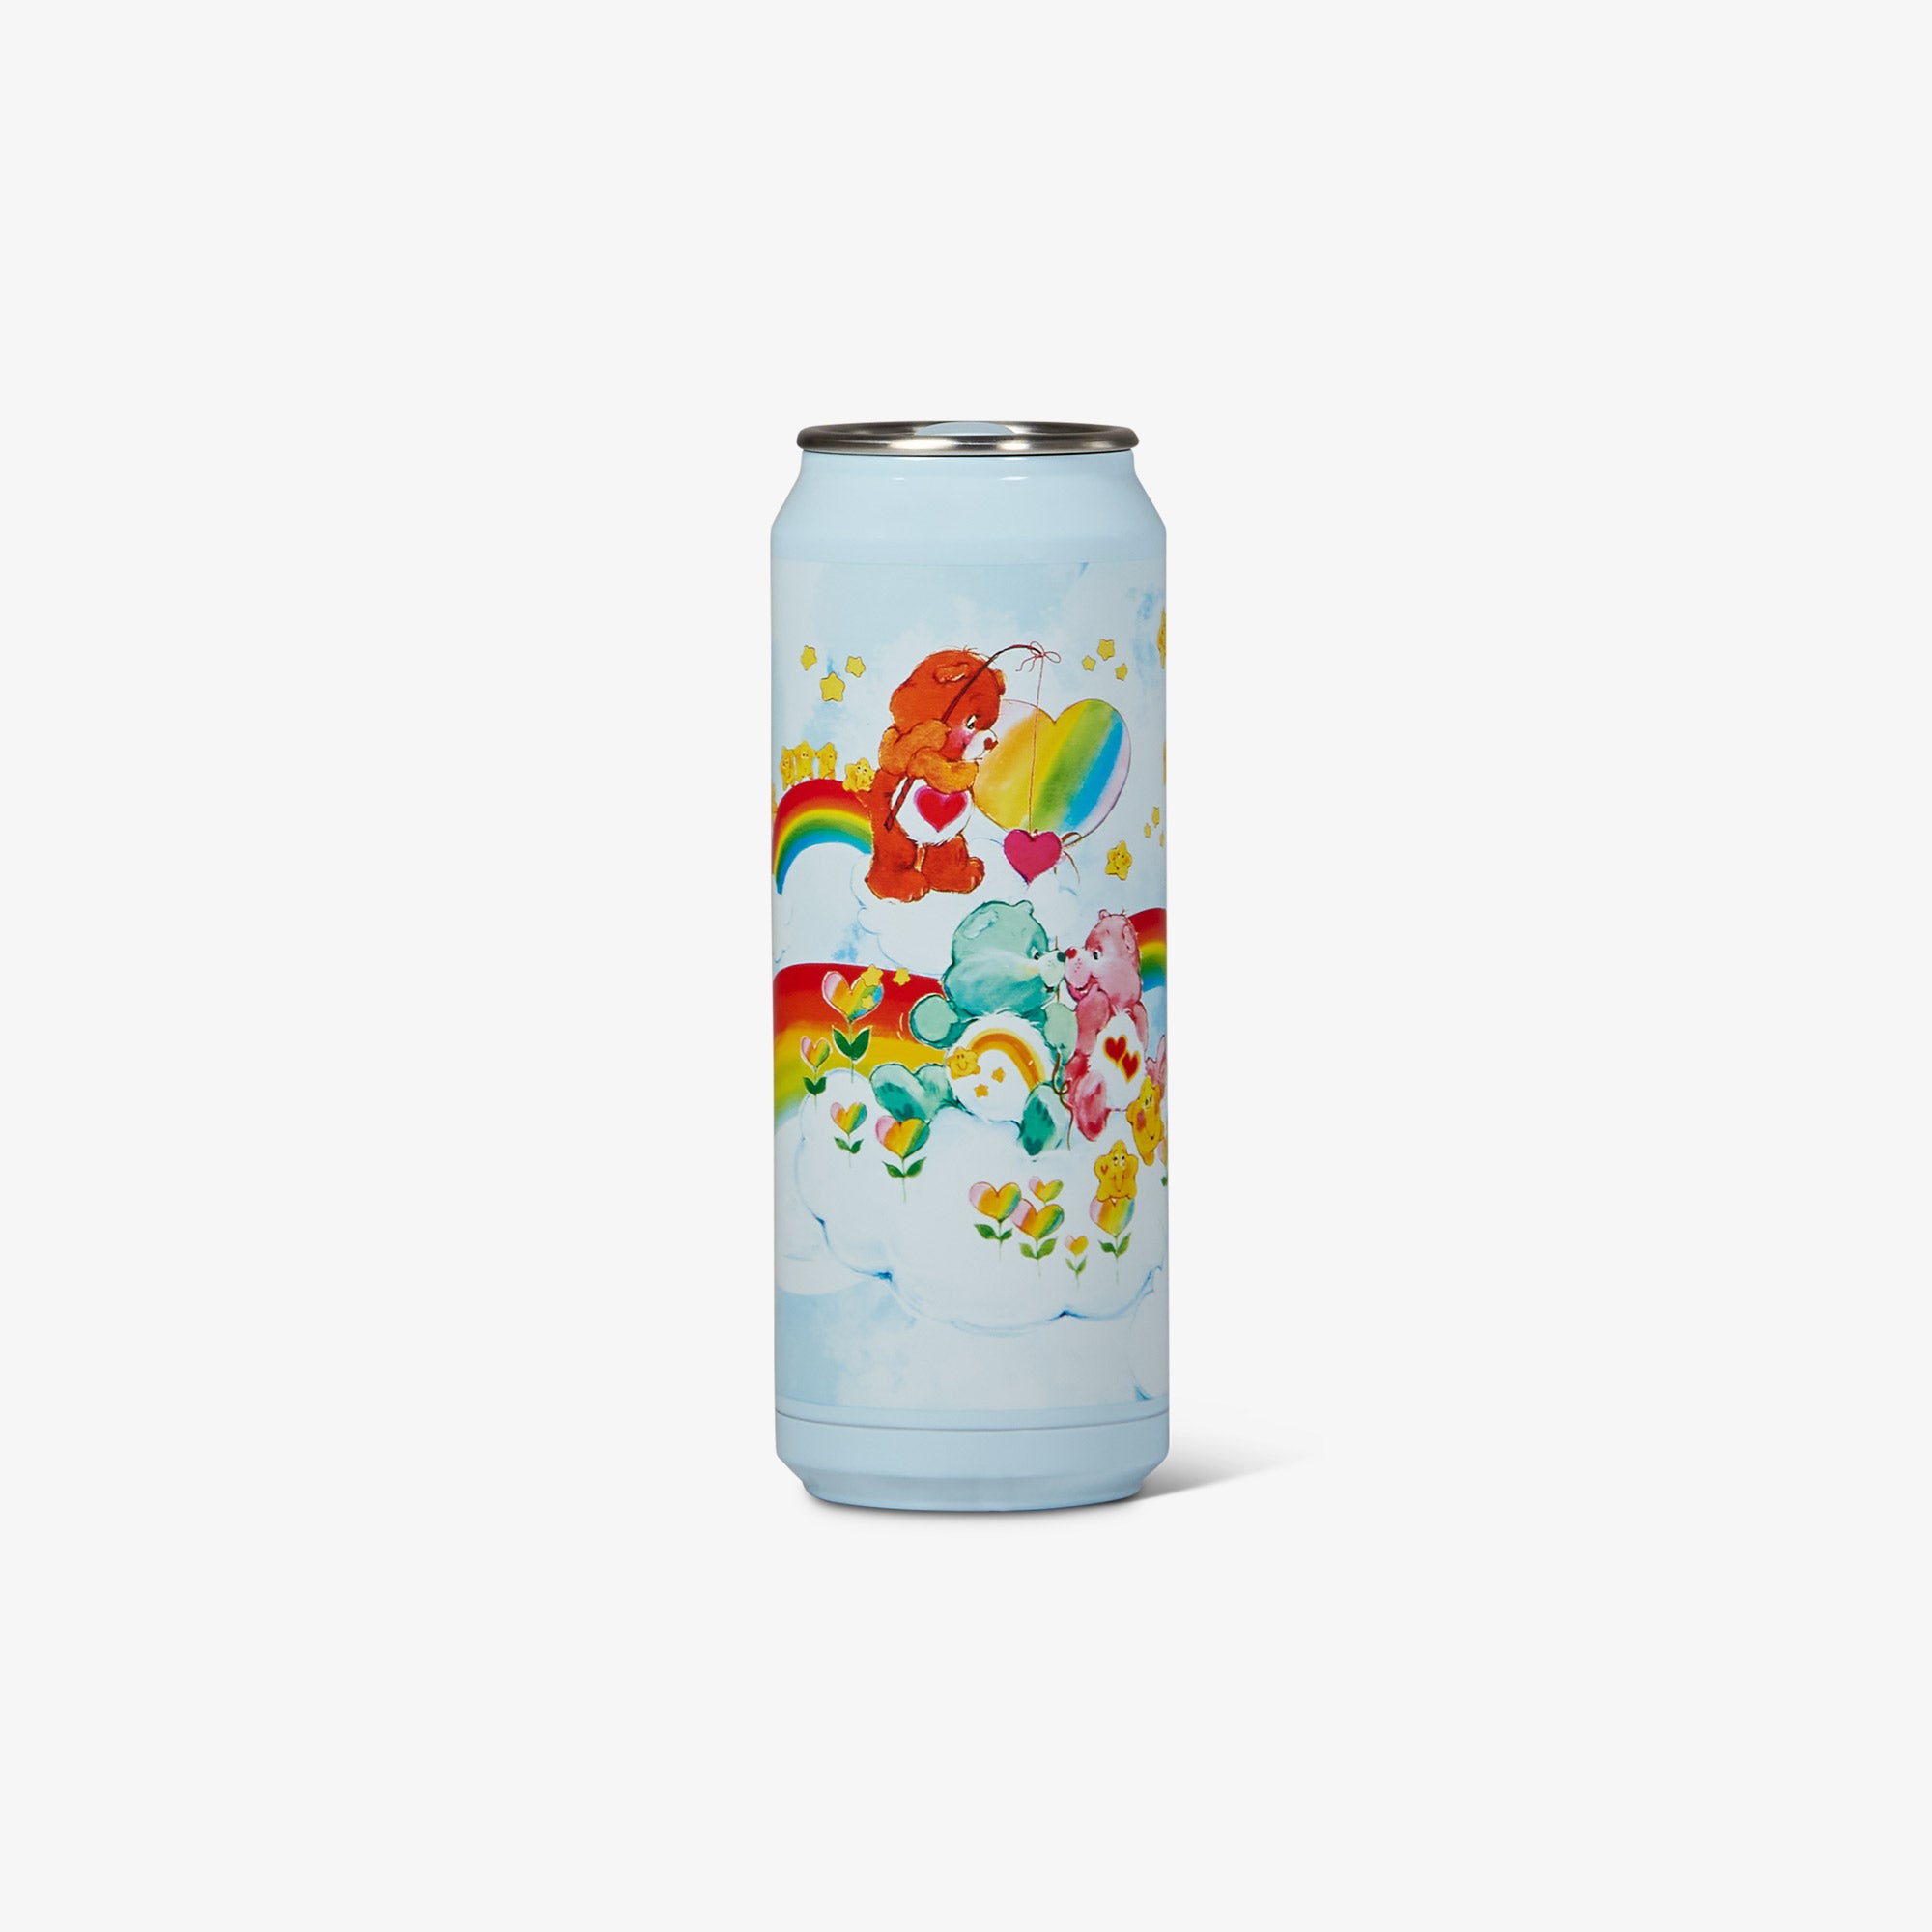 Rainbow Stainless Steel Can Cooler